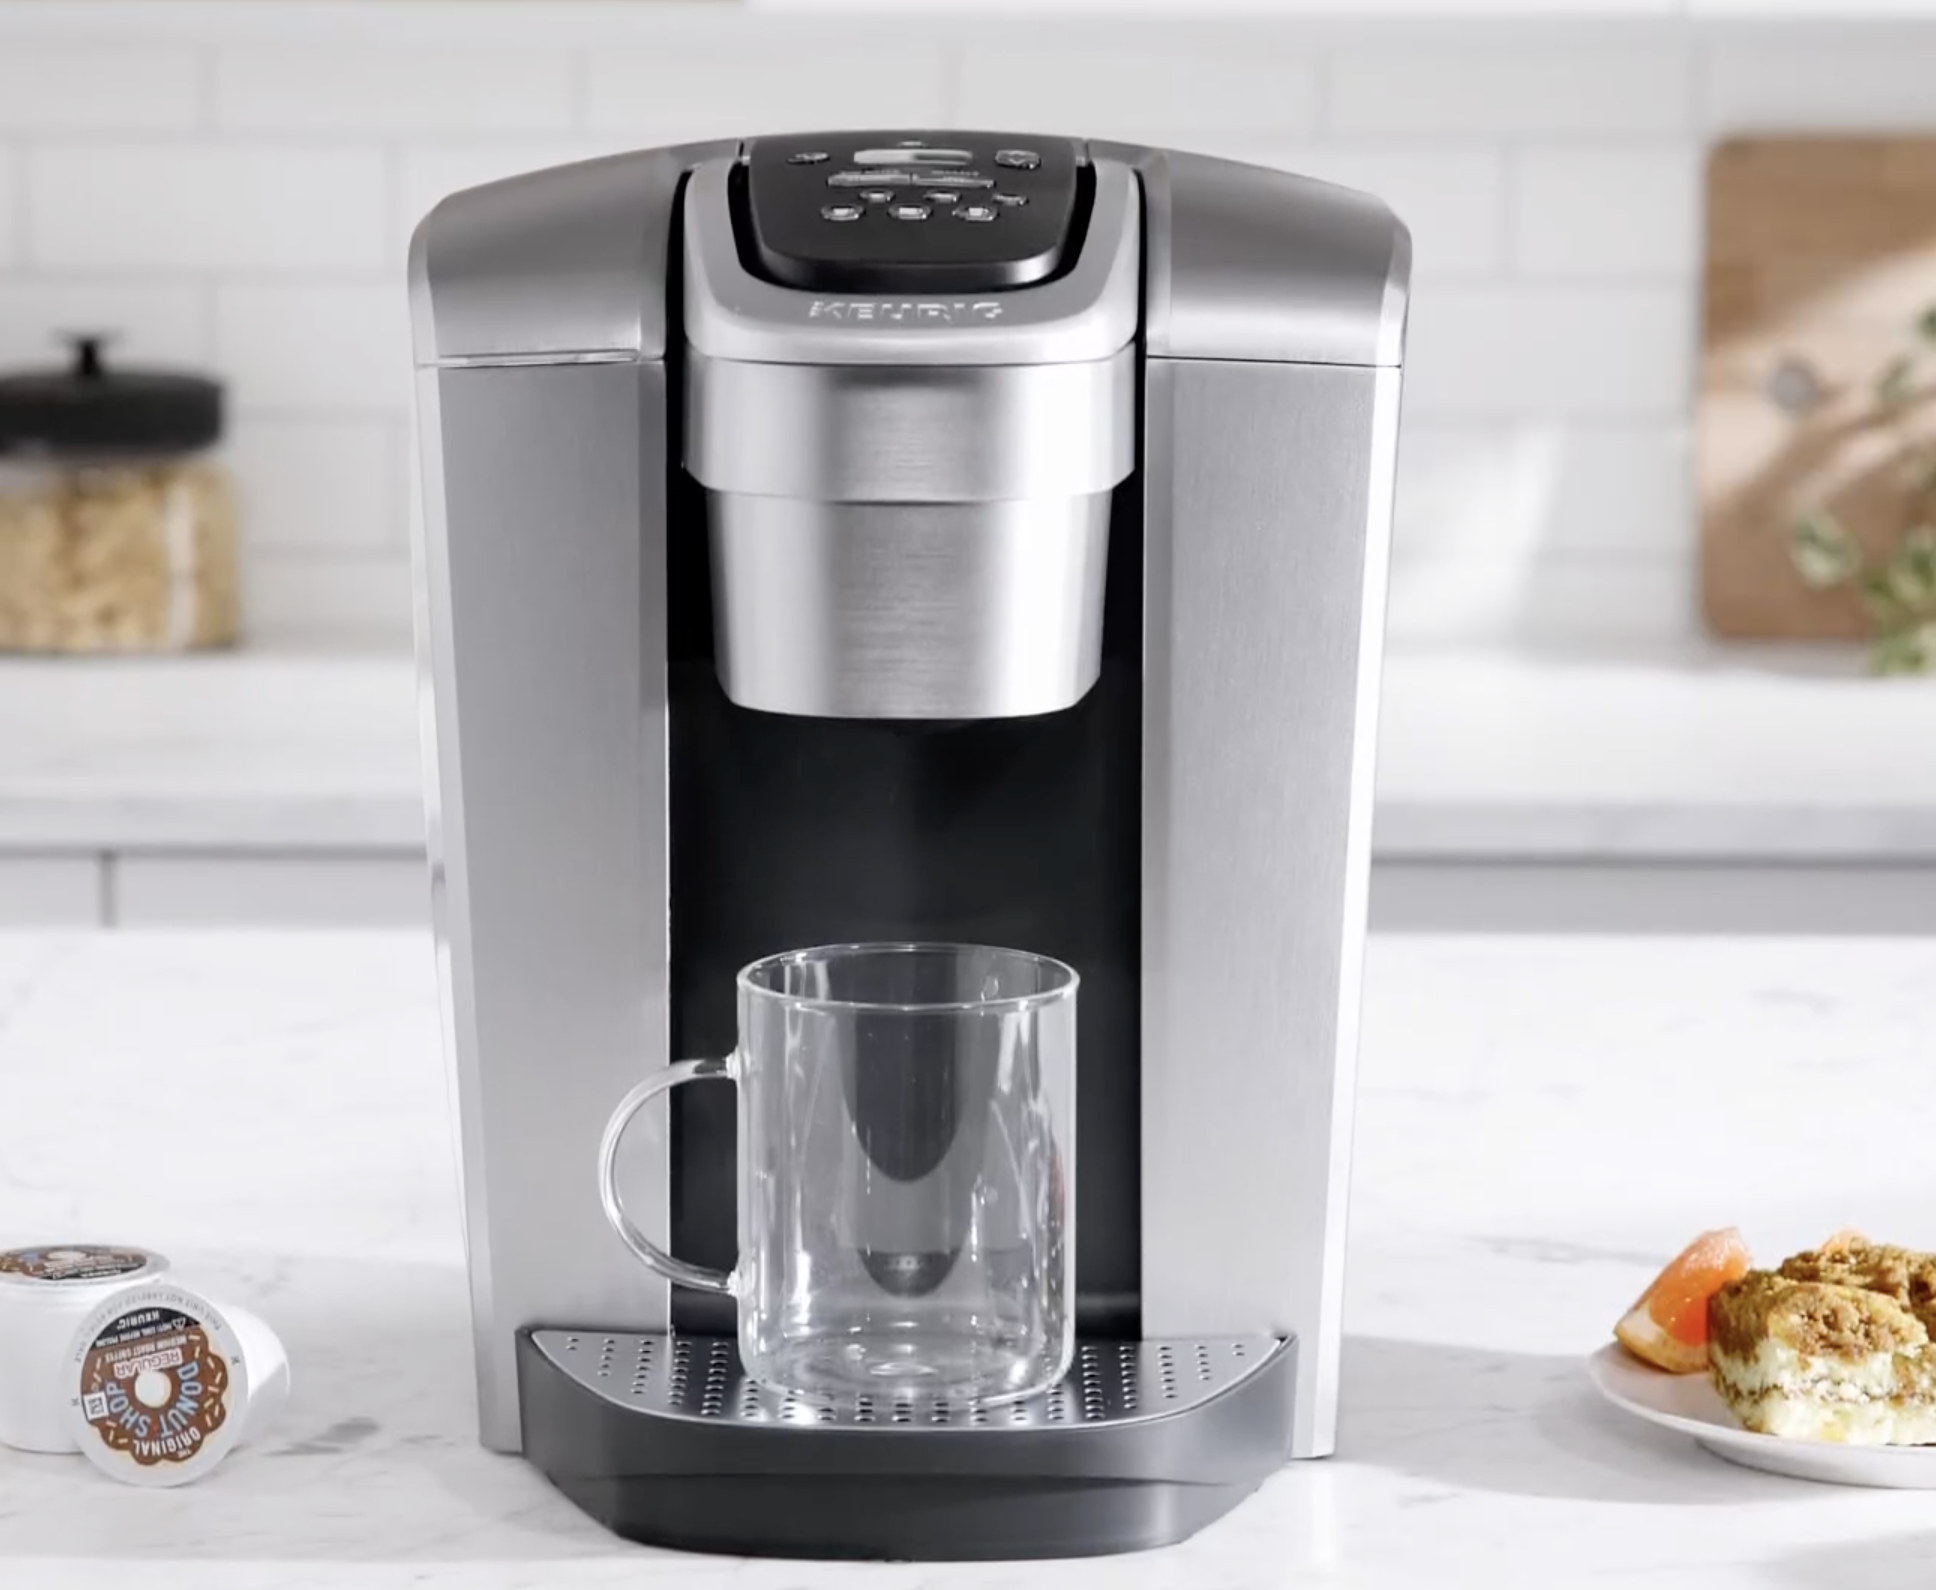 The silver and black Keurig coffee maker